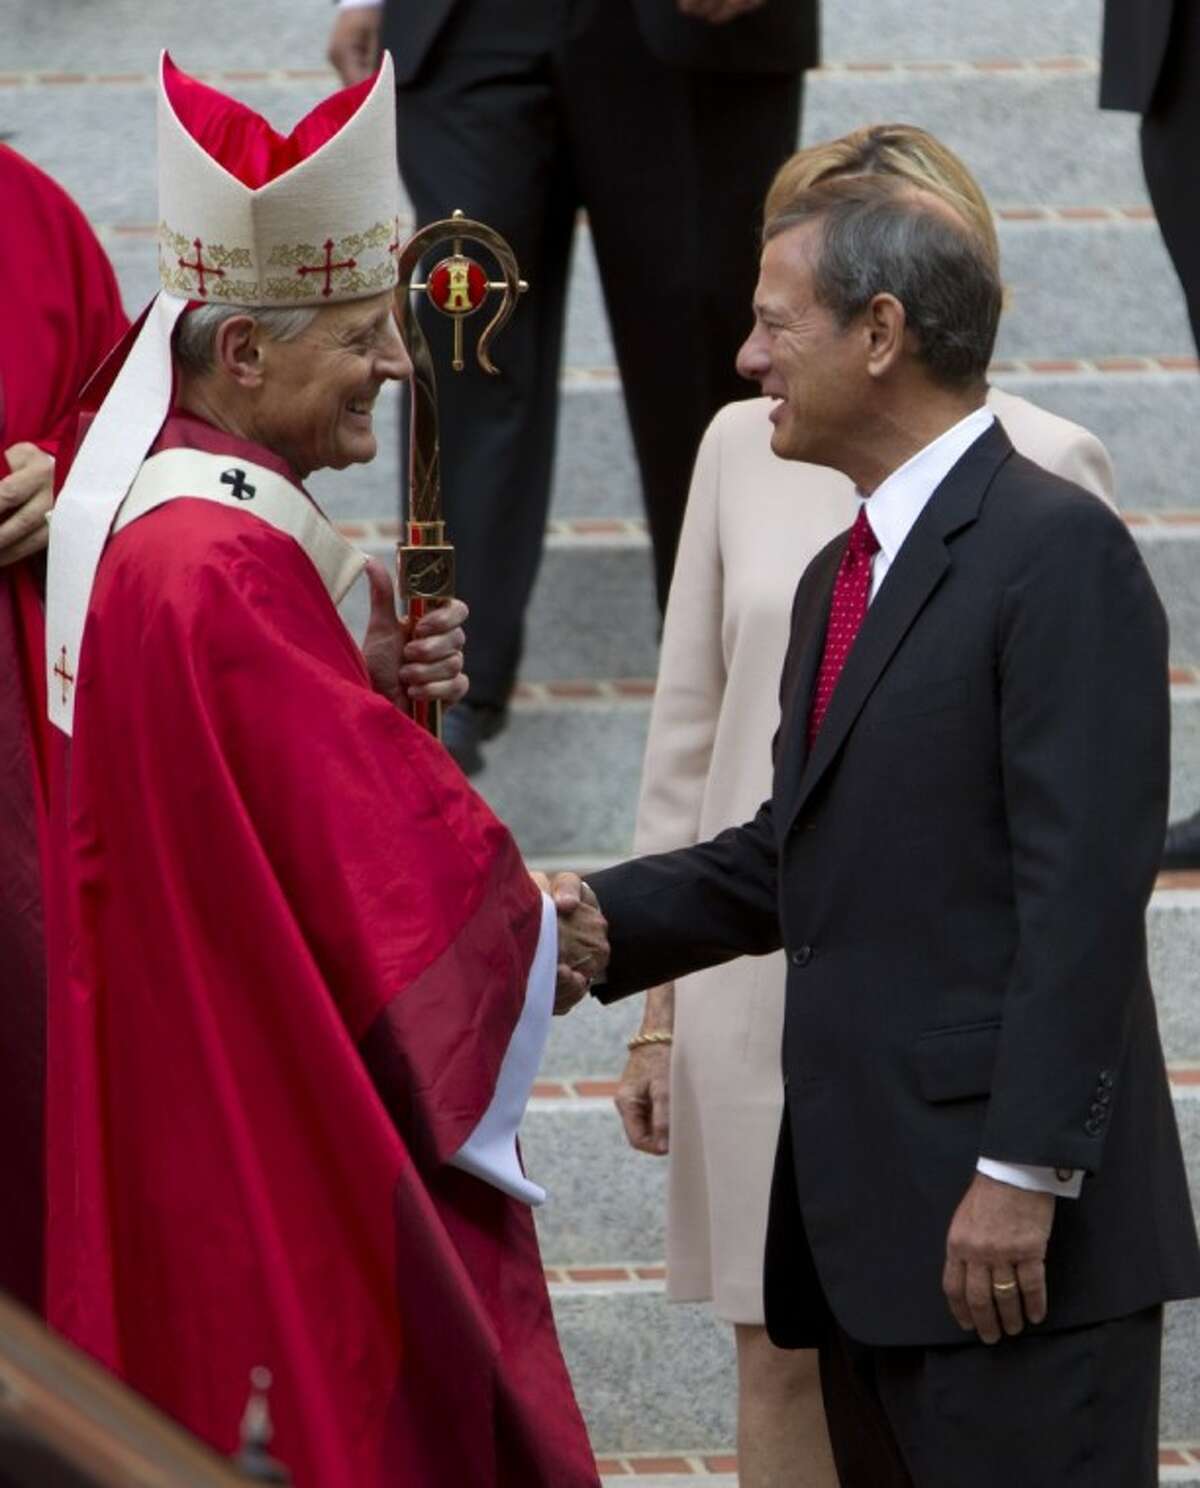 Cardinal Archbishop of Washington Donald Wuerl shake hands with U.S. Supreme Court Chief Justice John G. Roberts after the 60th annual Red Mass at the Cathedral of St. Matthew the Apostle in Washington Sunday. The Red Mass is traditionally held in Washington the day before the Supreme Court's new term opens.